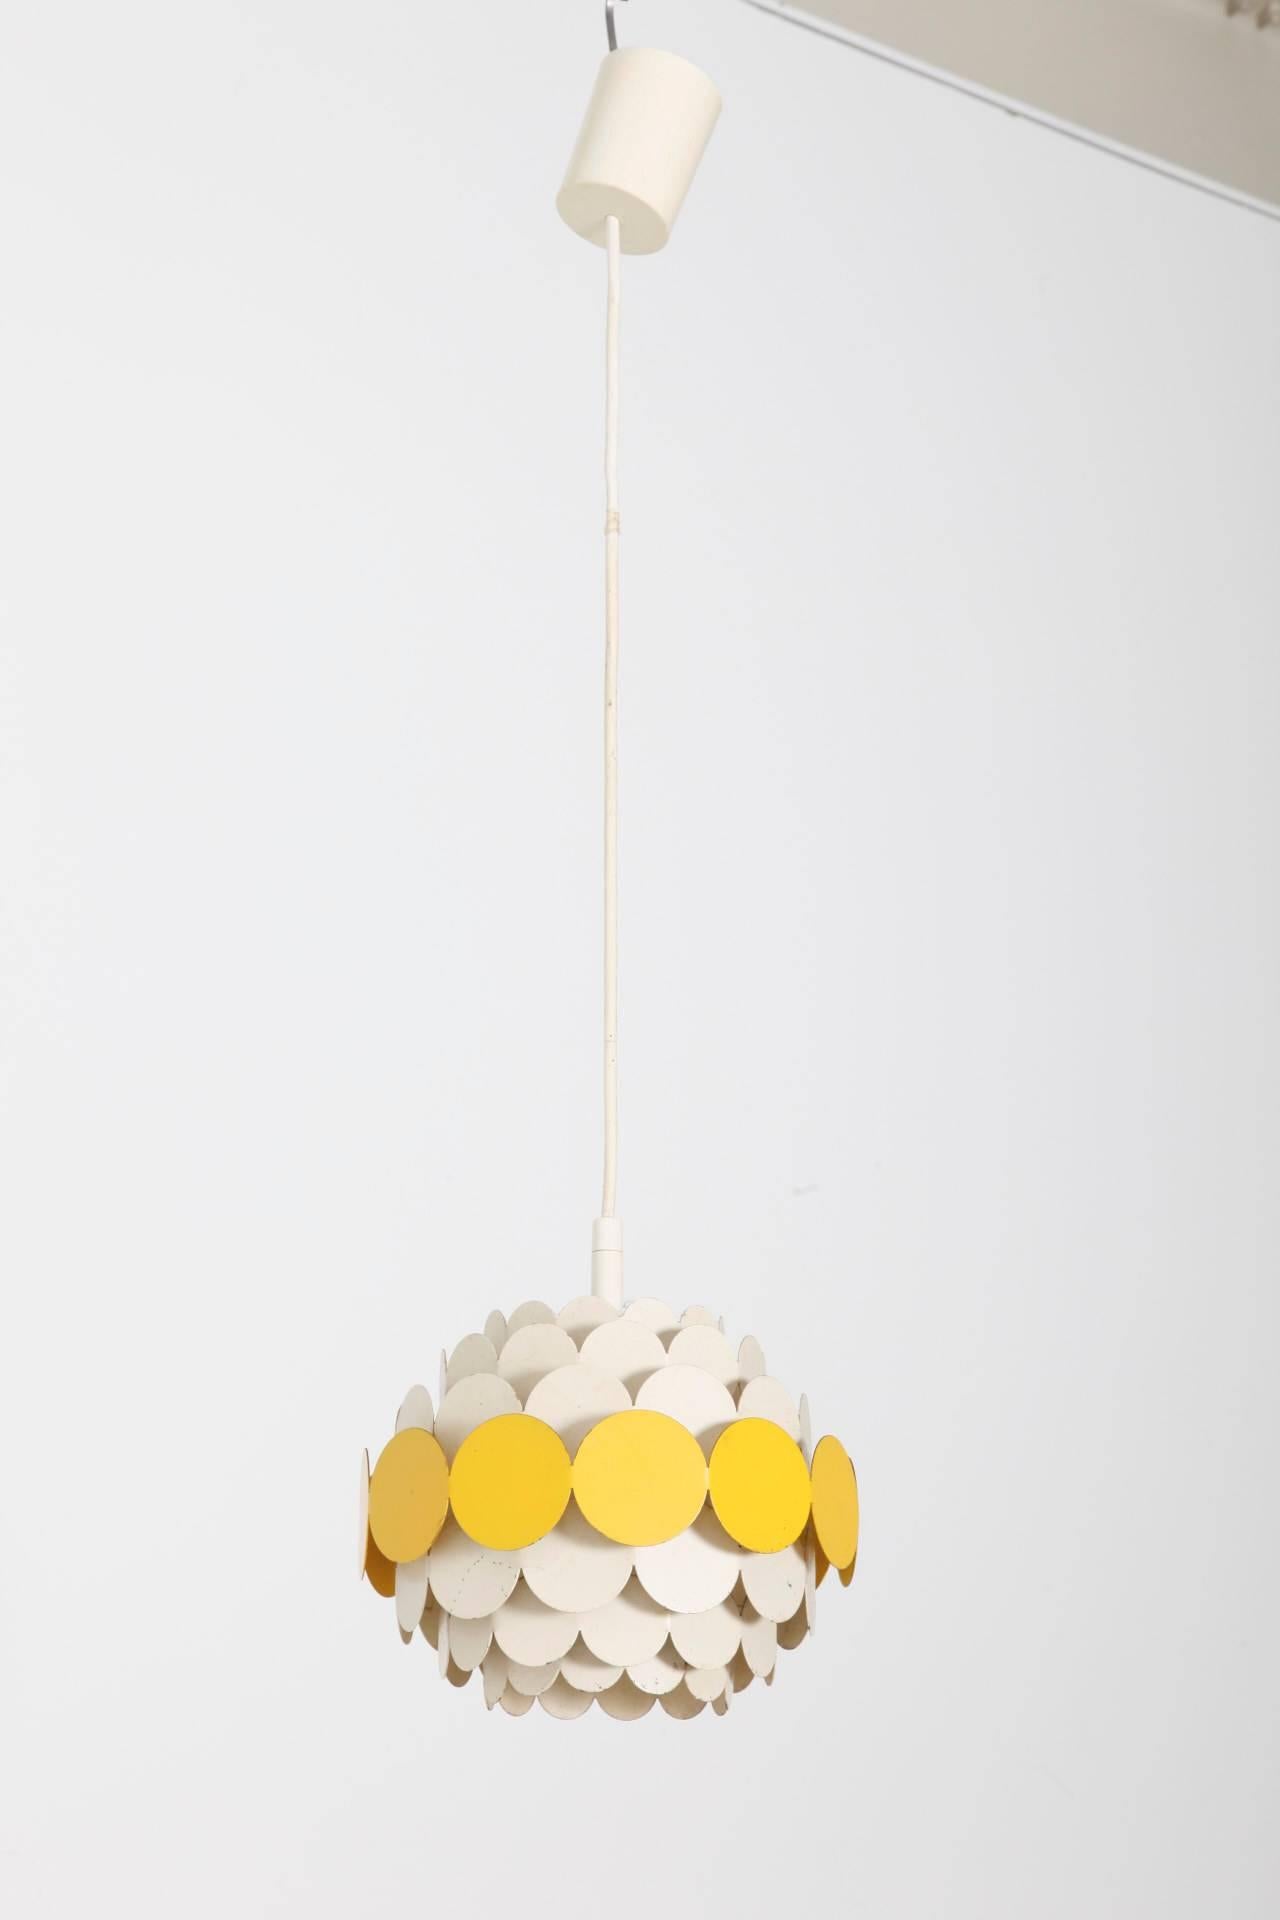 A very nice 1950s pendant, the special construction creates a soft atmospheric lighting in the living room or kids room.